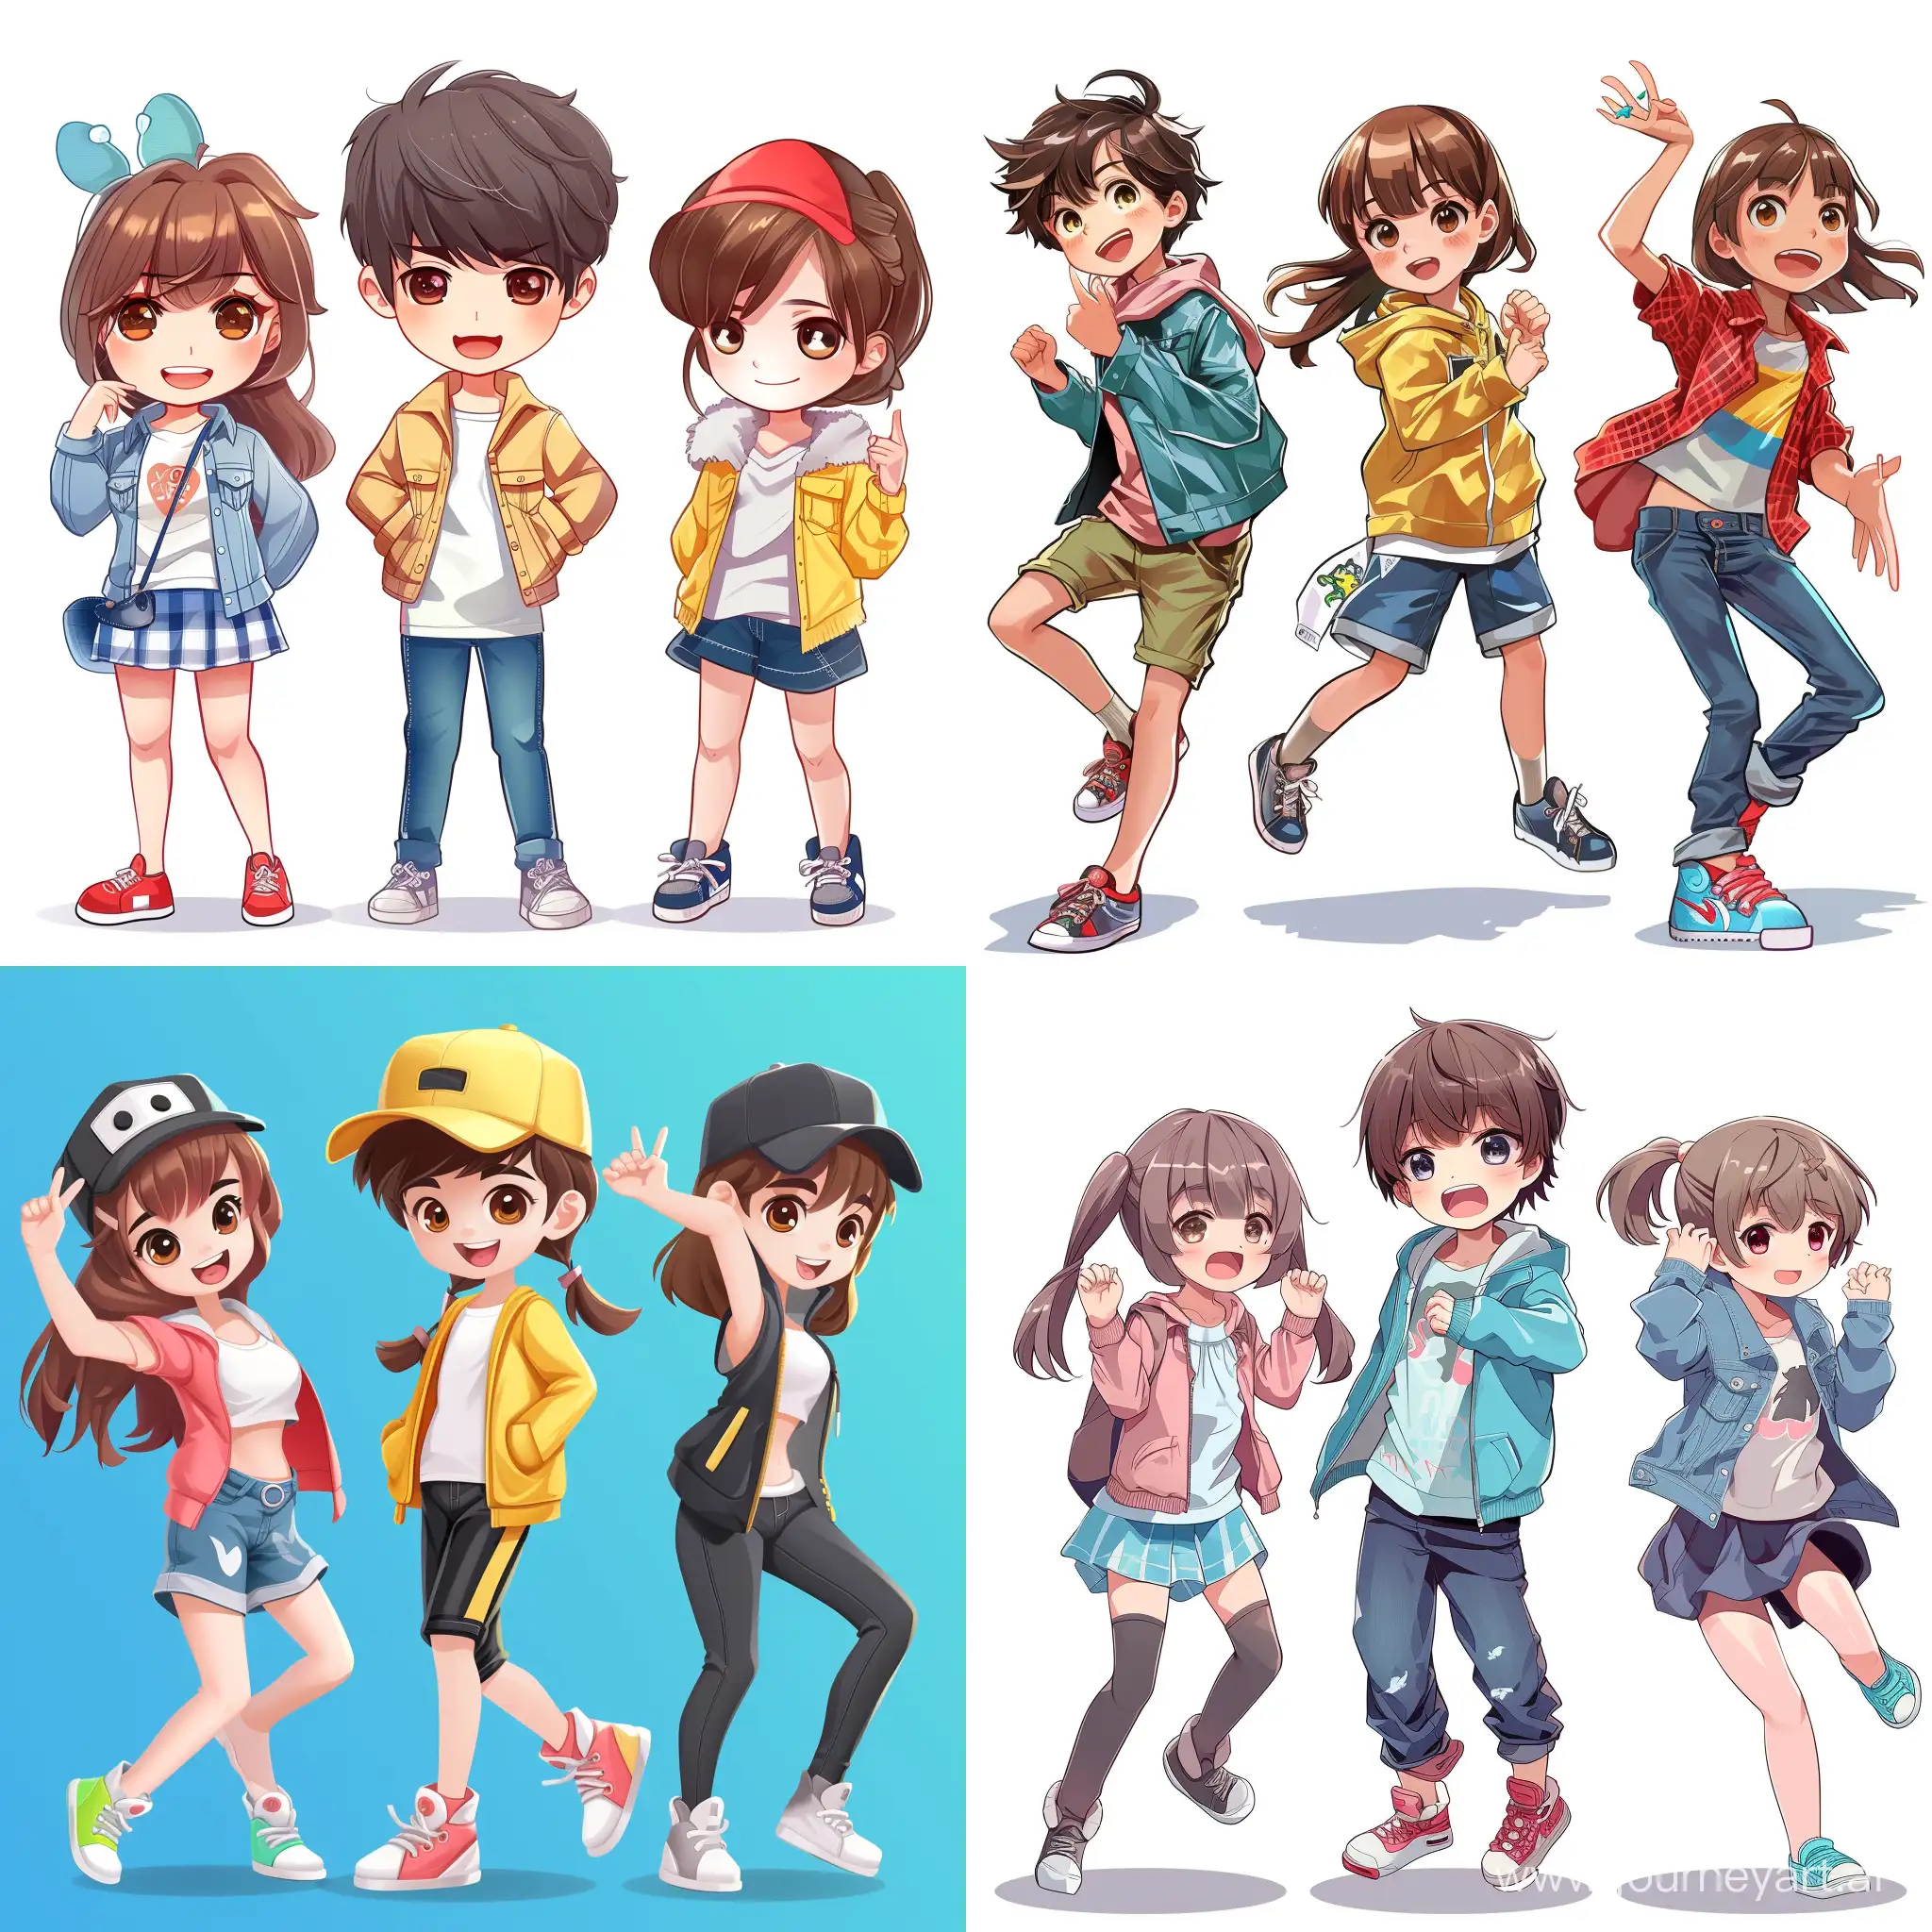 Smart-Anime-Kids-Engage-in-Hilarious-Actions-Playful-Cartoon-Characters